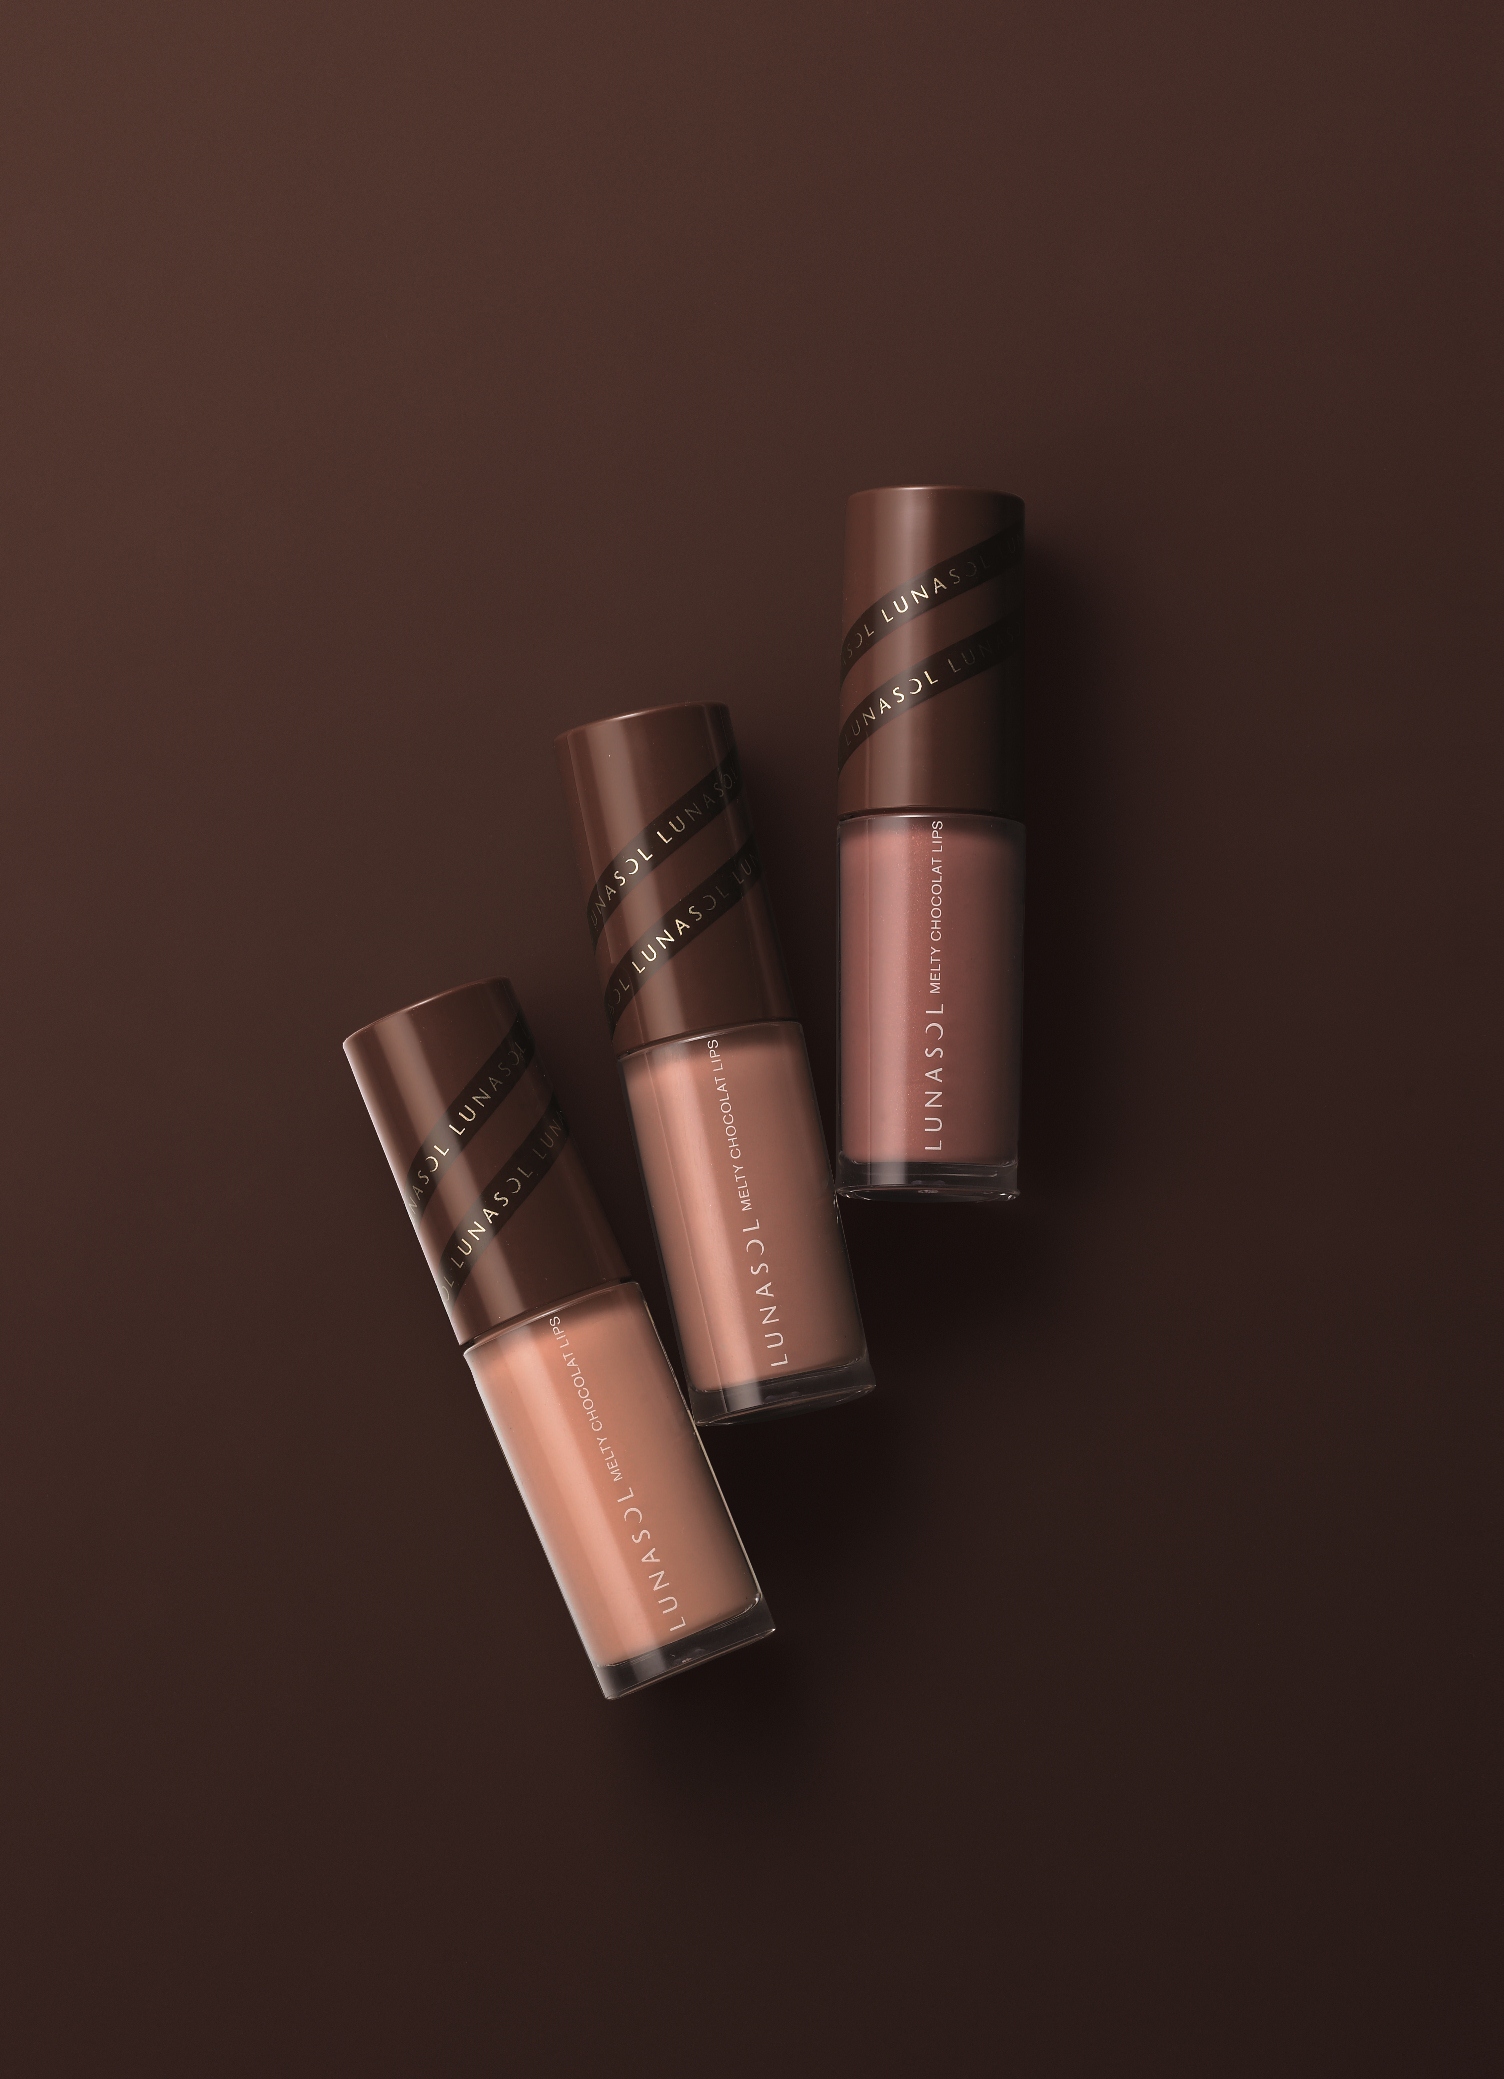 New lip products provide a sweet solution for consumers